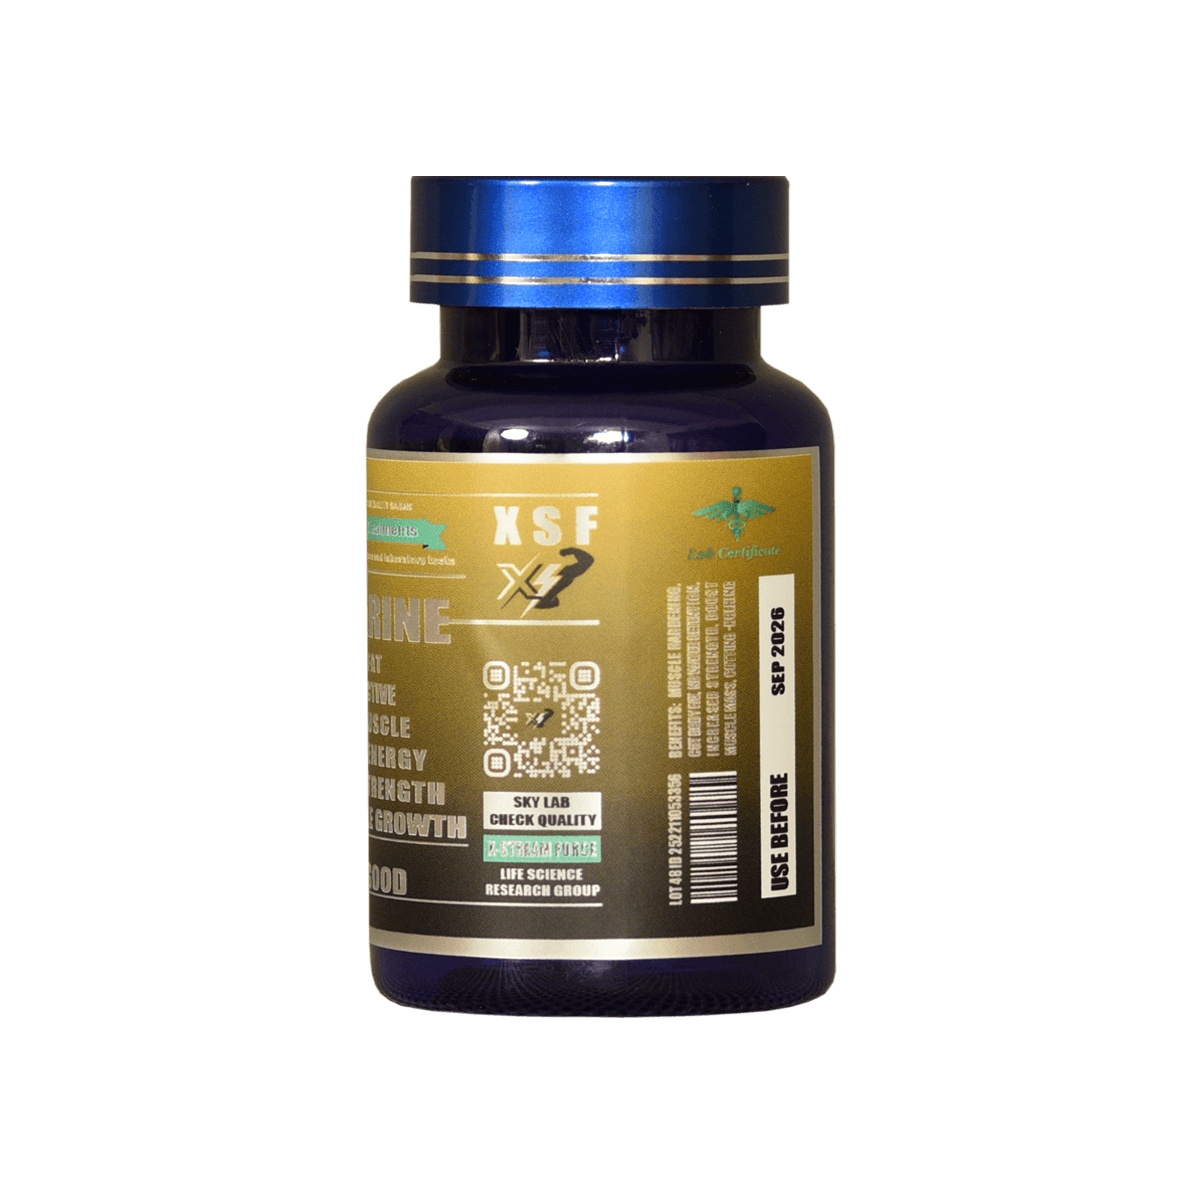 cardarine-gw155016-capsules-100-10mg-muscle shop-xstreamforce-for cardio-strength-fat cleaner-endurance-buy online✦gw501516sarms✦ fitness supplements | XSF Store